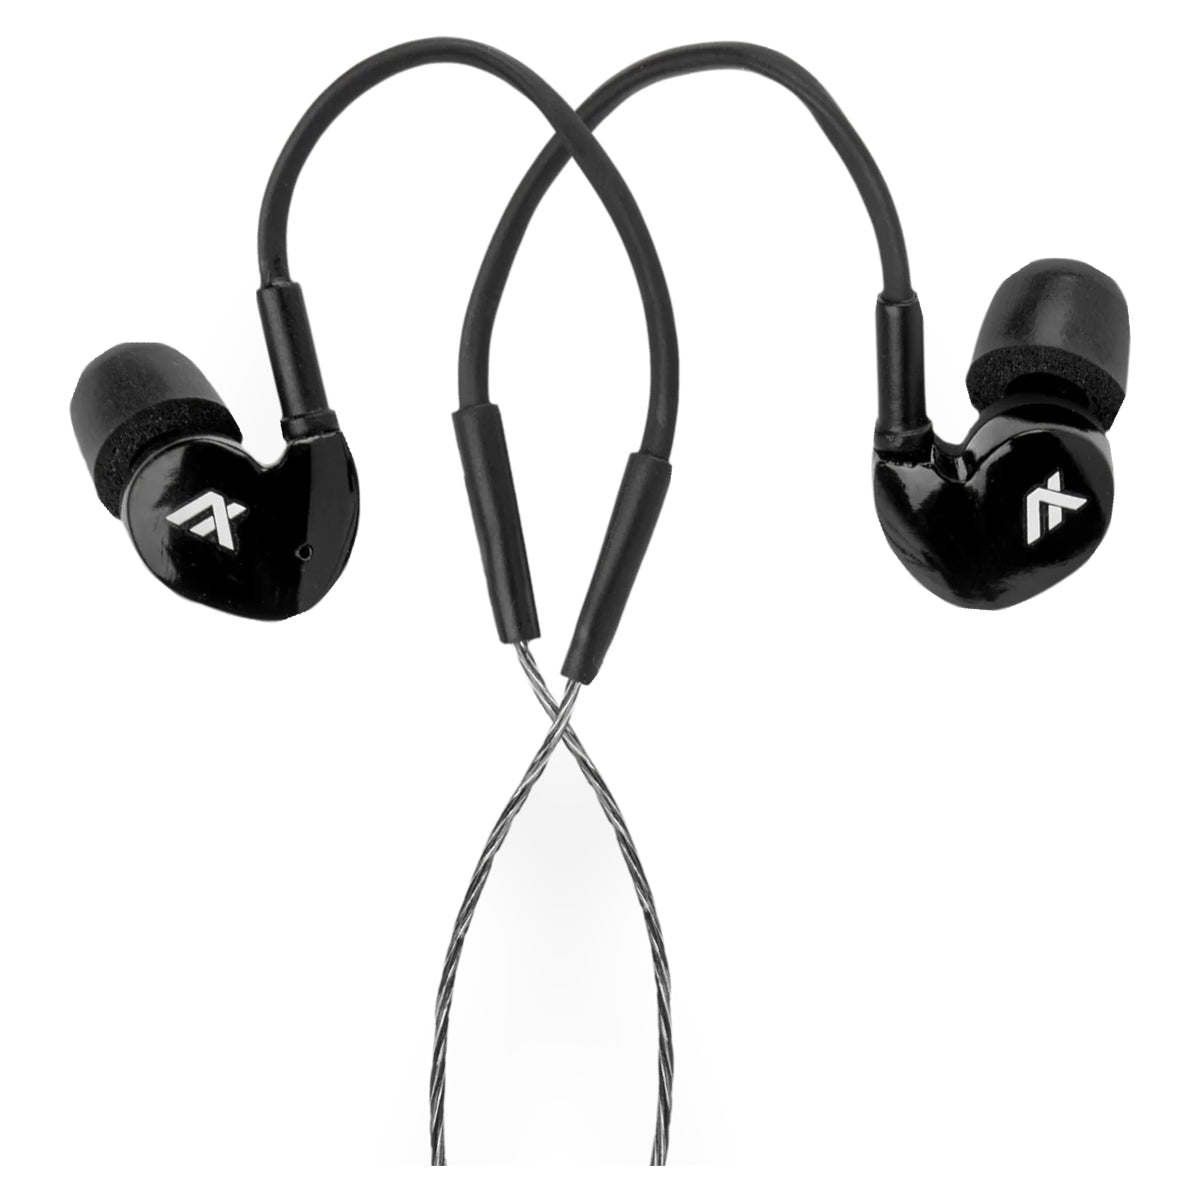 Axil GS Extreme 2.0 Ear Buds